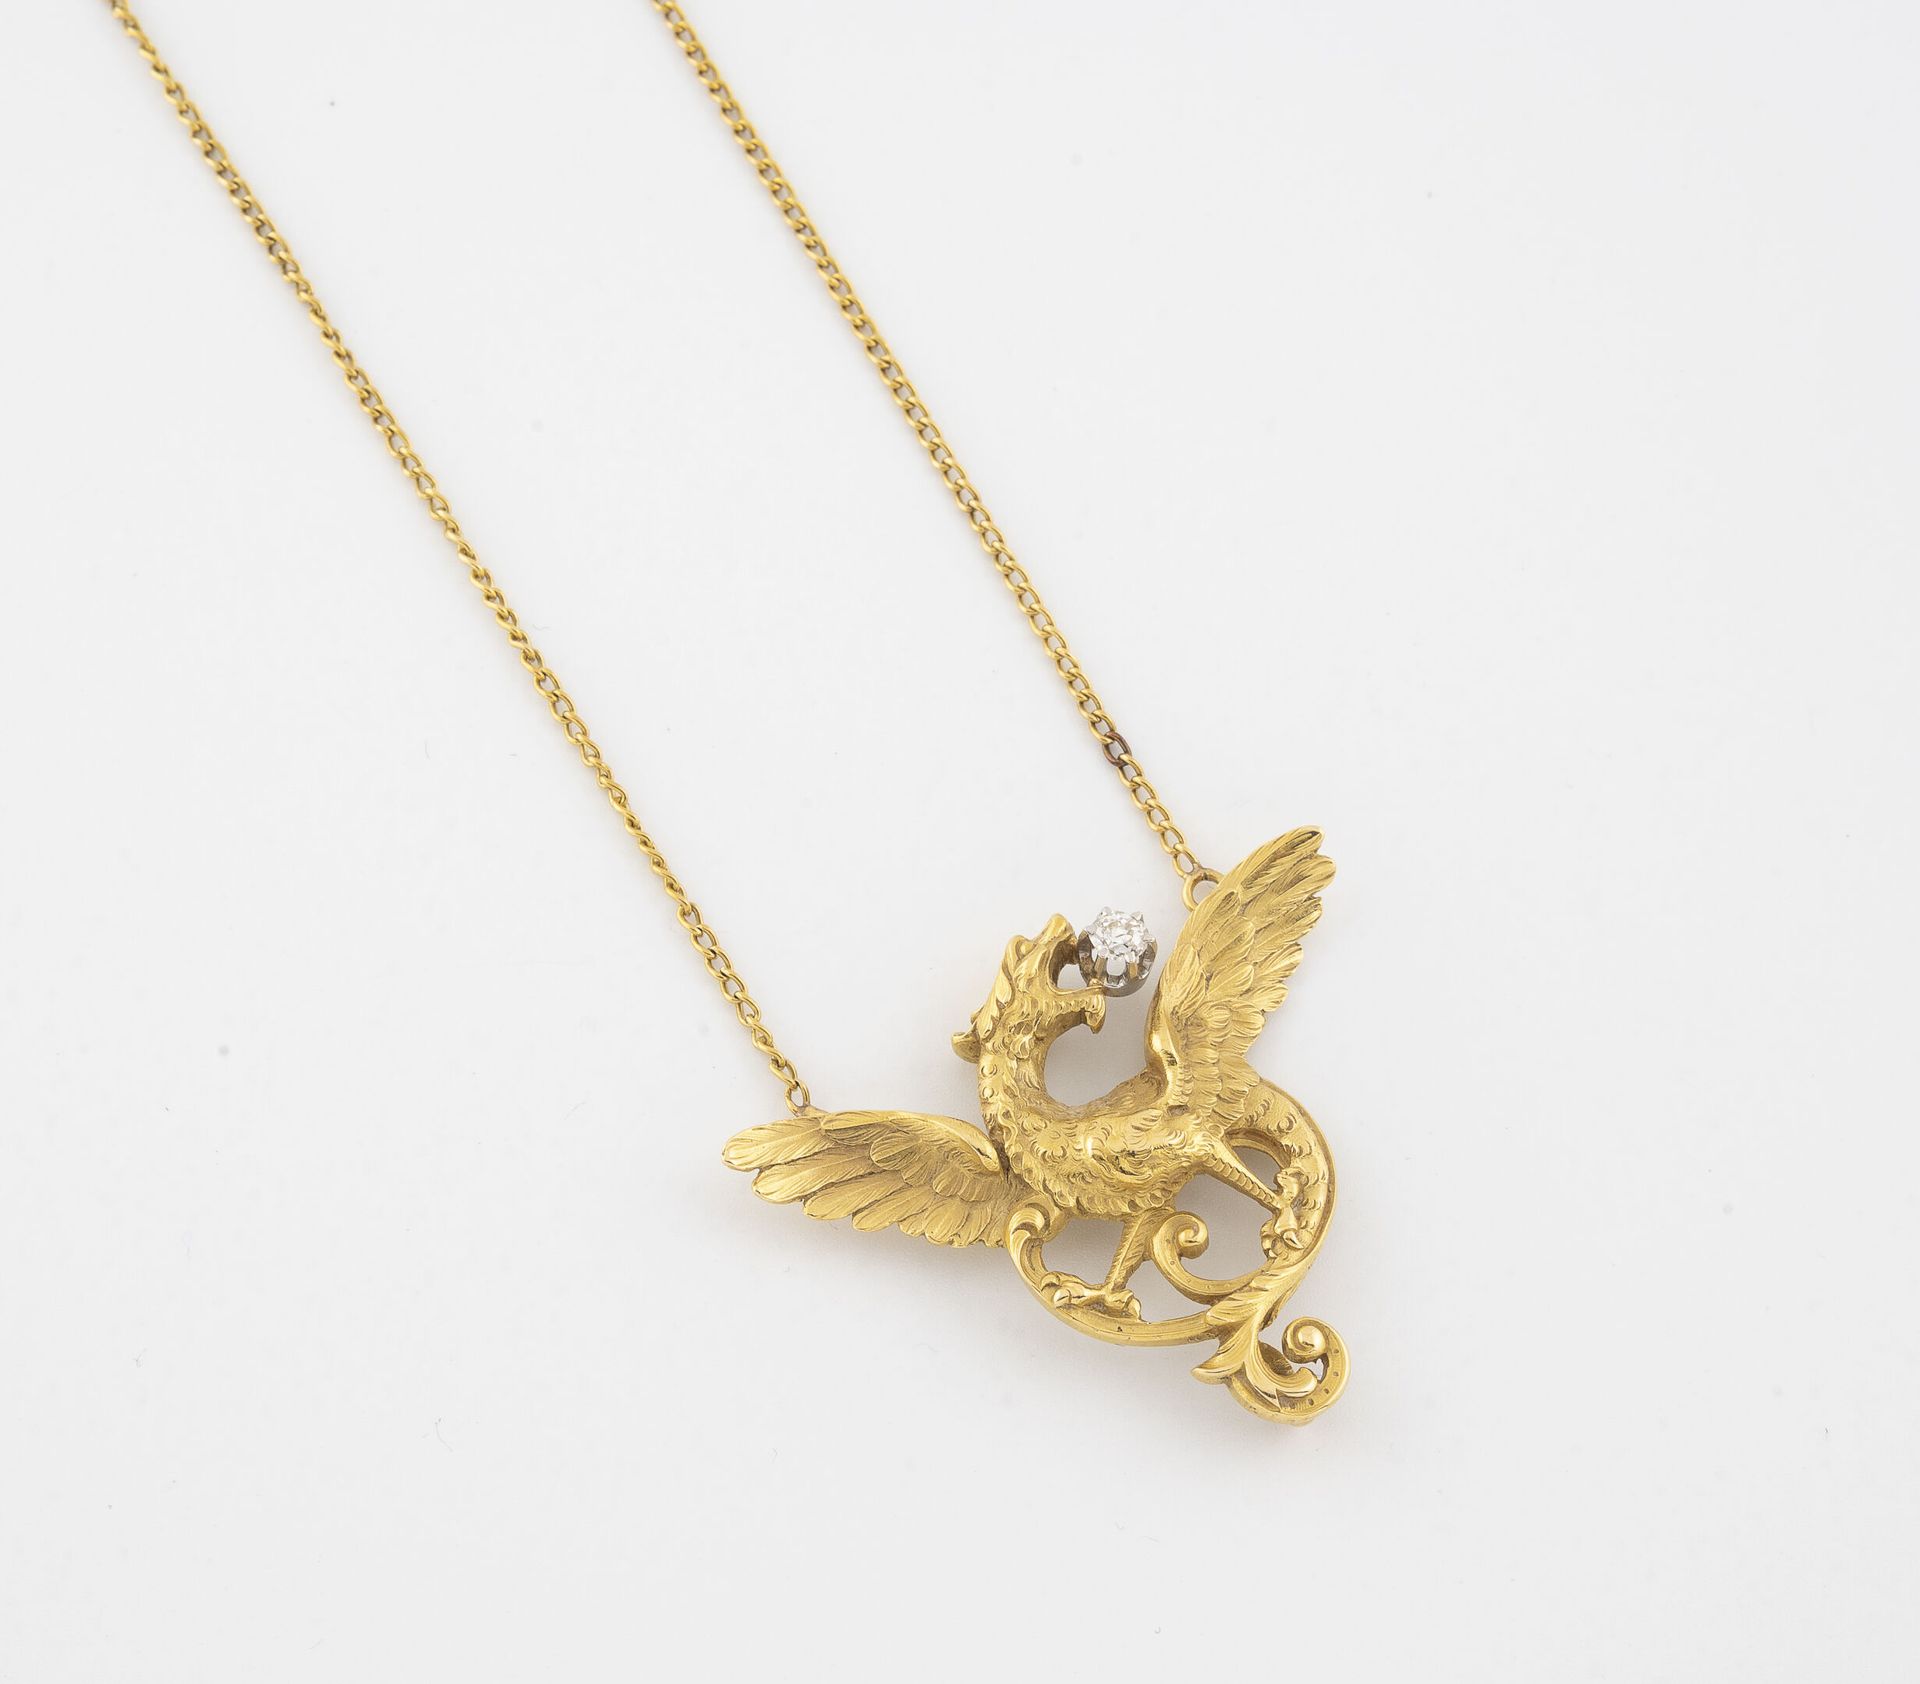 Null Yellow gold (750) necklace with a pendant griffin holding an old cut diamon&hellip;